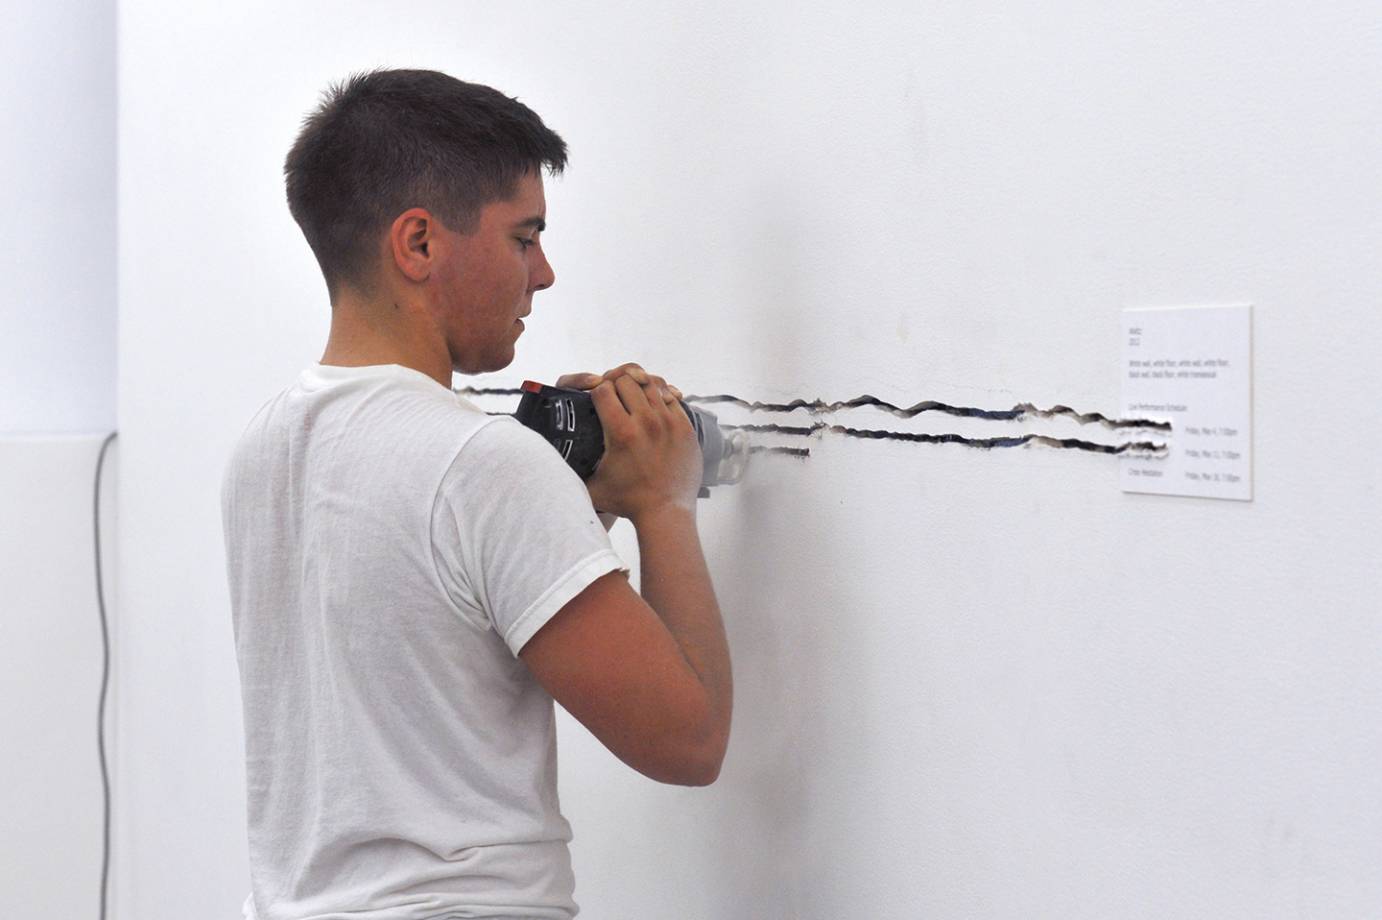 Yve Laris Cohen, dressed in a white t-shirt, creating deep lines in a white wall using a power tool.